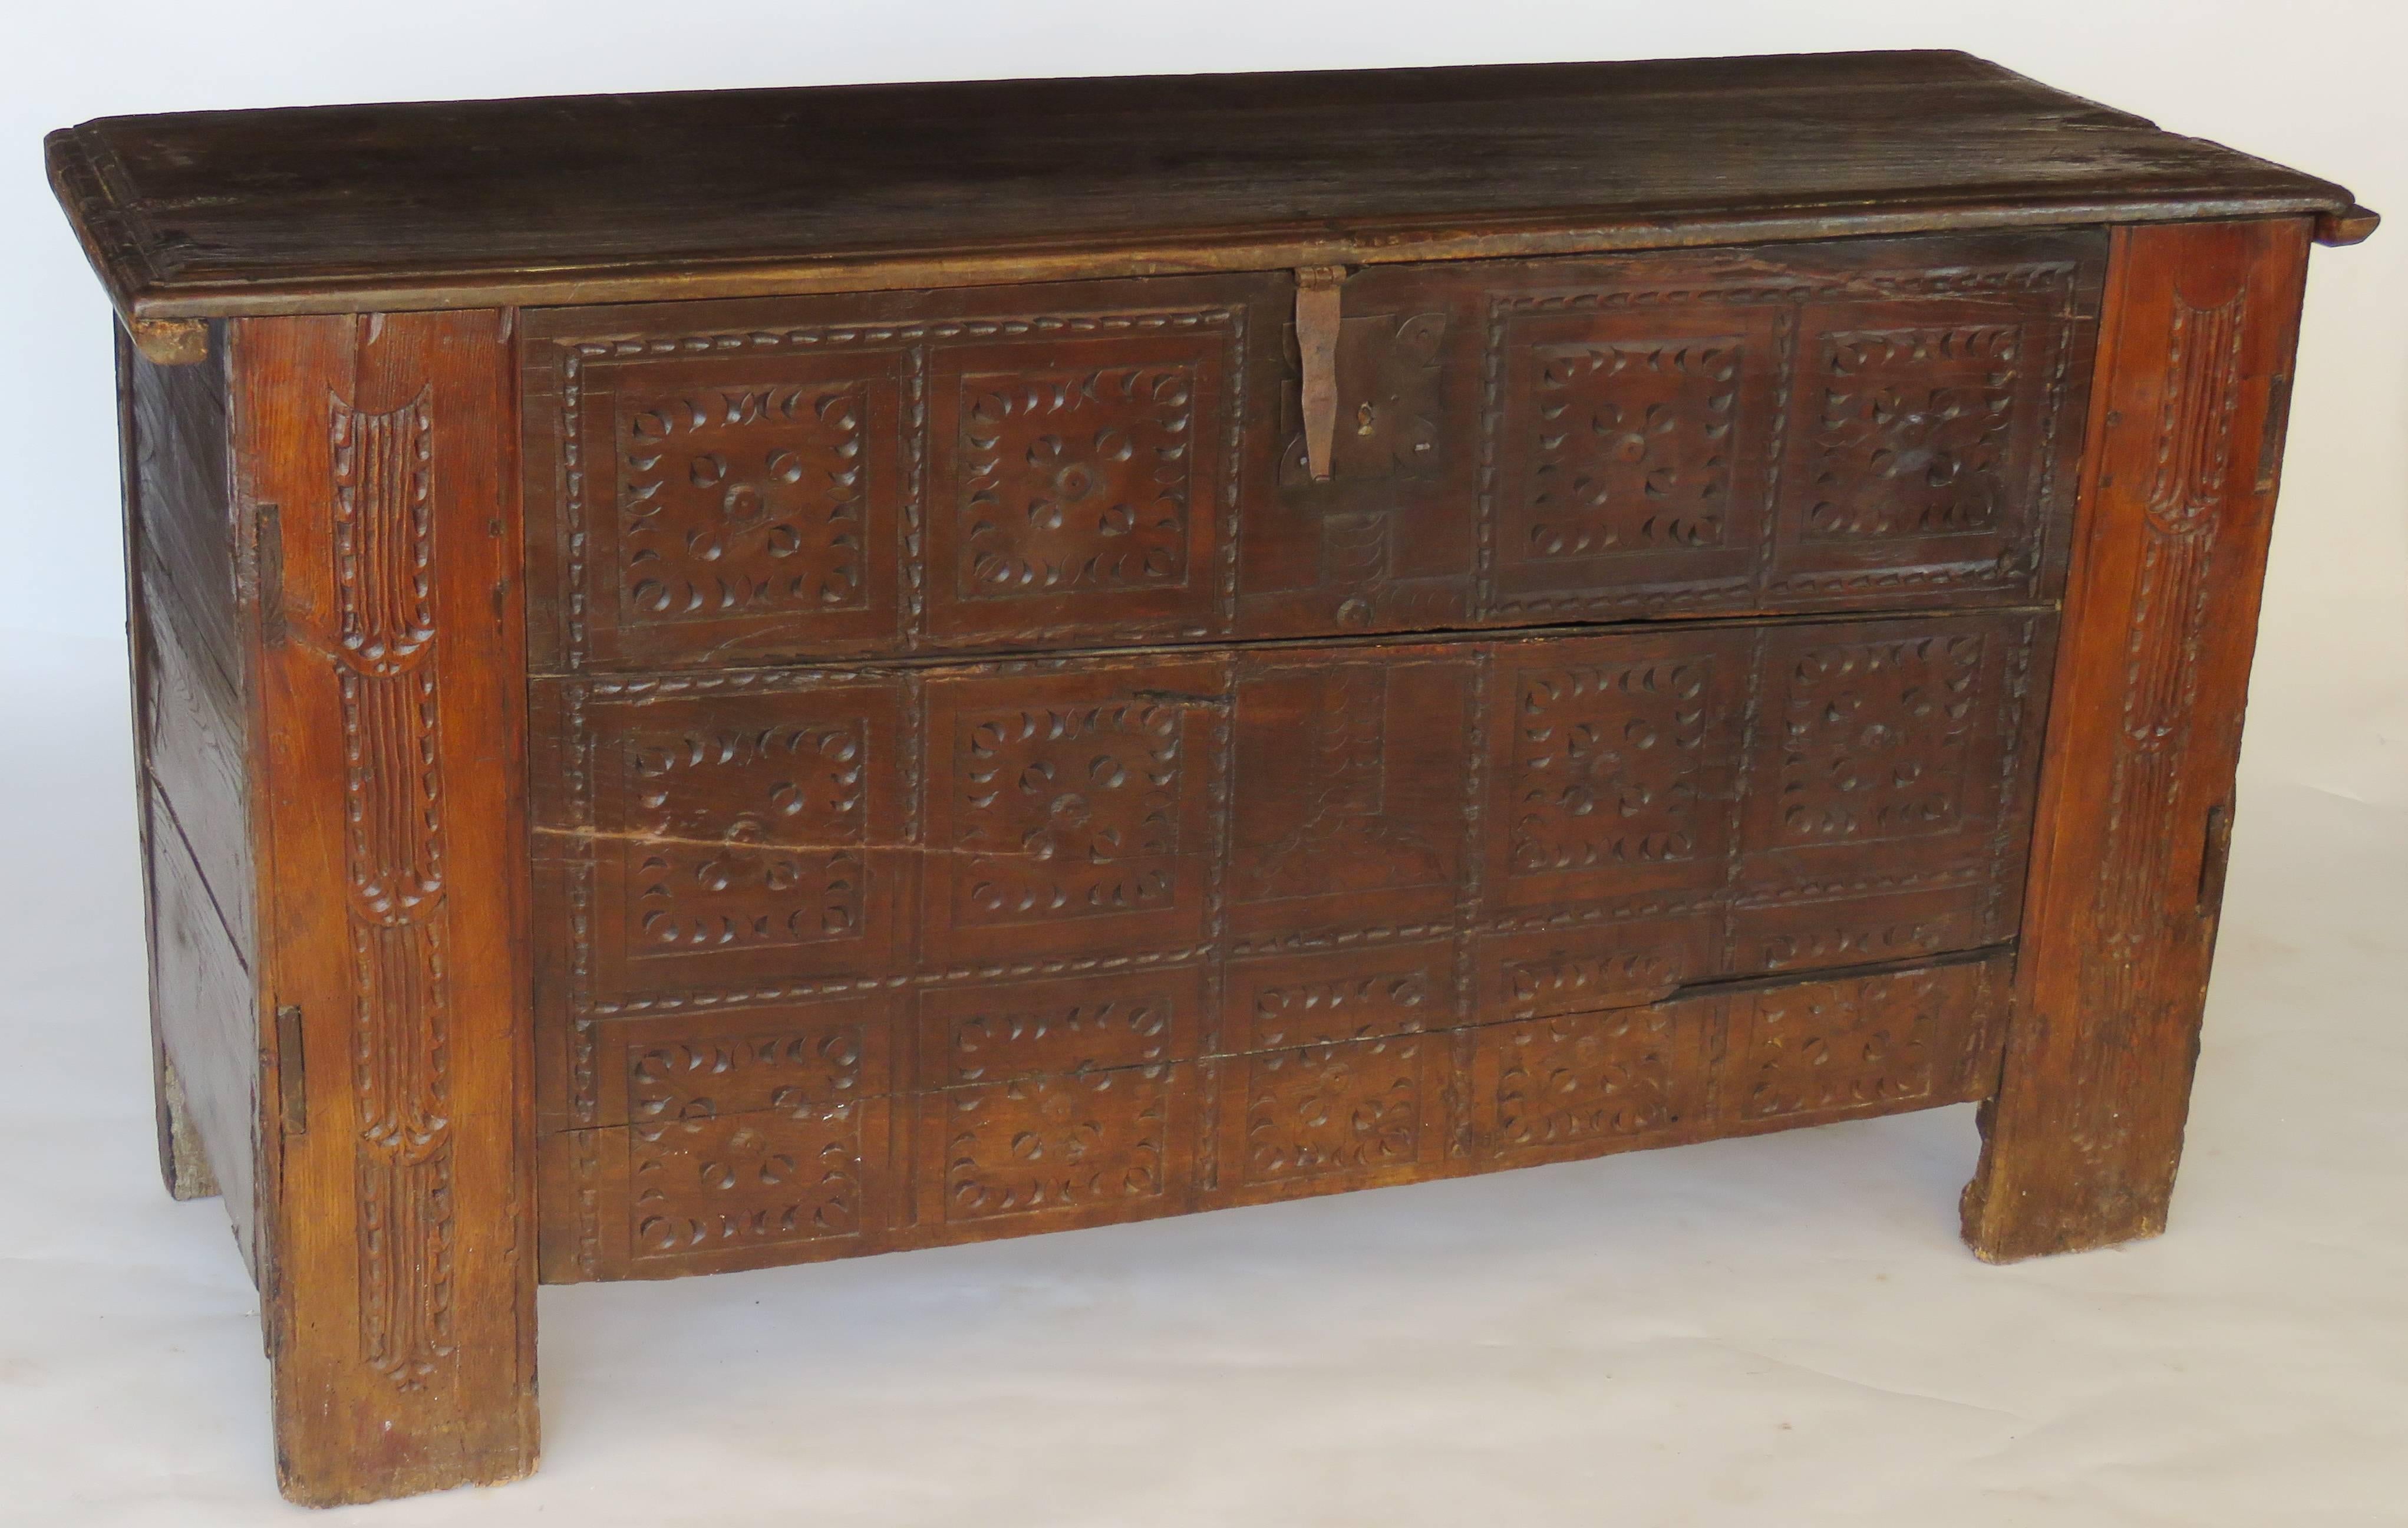 Rectangular hinged molded top over a deeply carved conforming case, front panel with thirteen geometric rosette motifs, centred by large chip carved cross, flanks carved with vertical grooves; original shield lock and hardware.